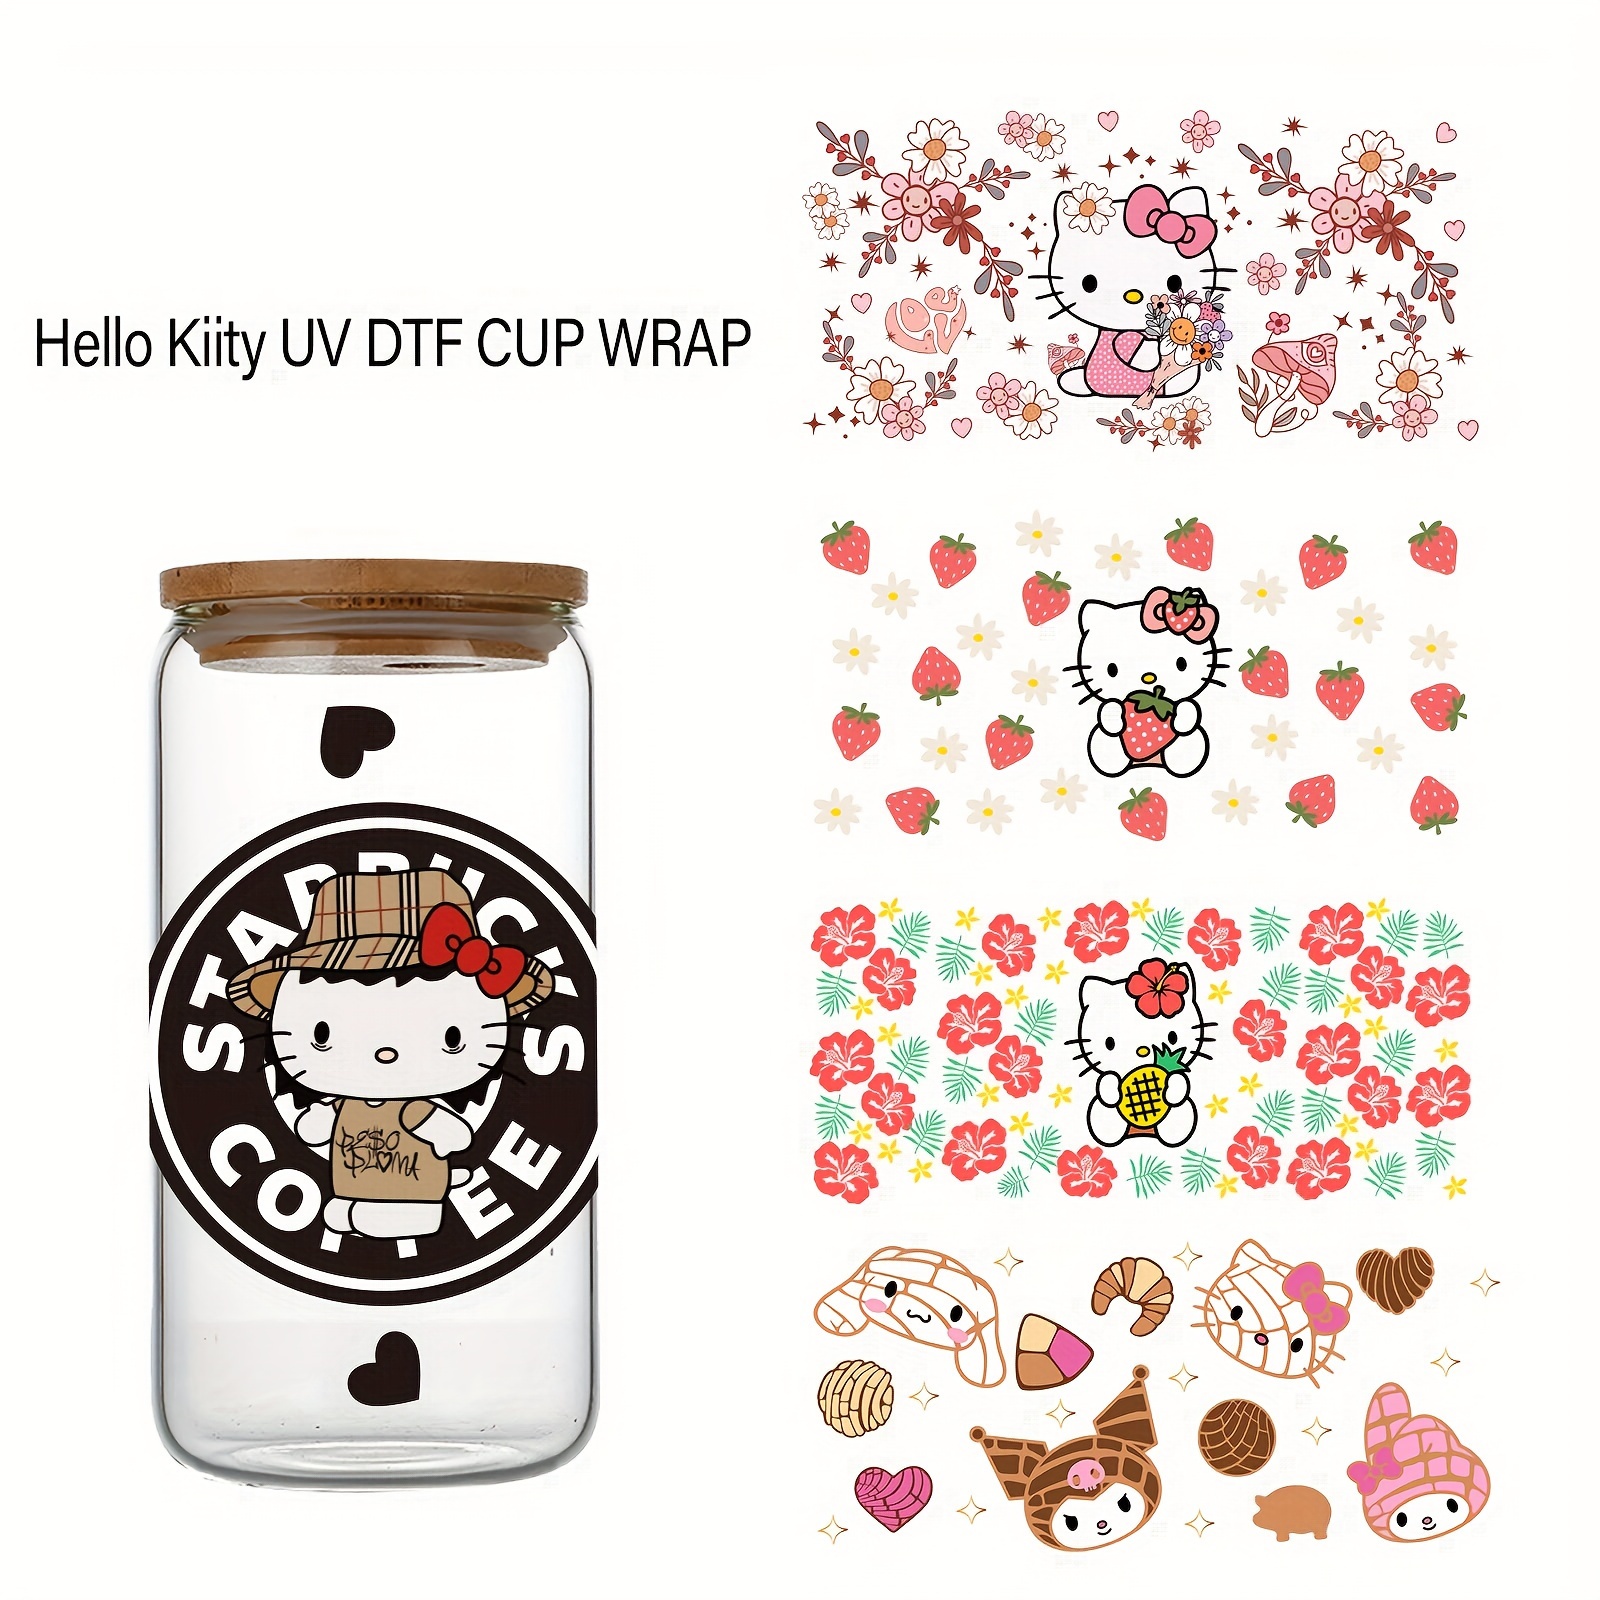 UV DTF Cup Wrap Transfer Stickers for Glass Cups Decals for Laptops, Water Bottles, Cups 10sheets Esthetics Decorative Sticker Transfers for 16oz